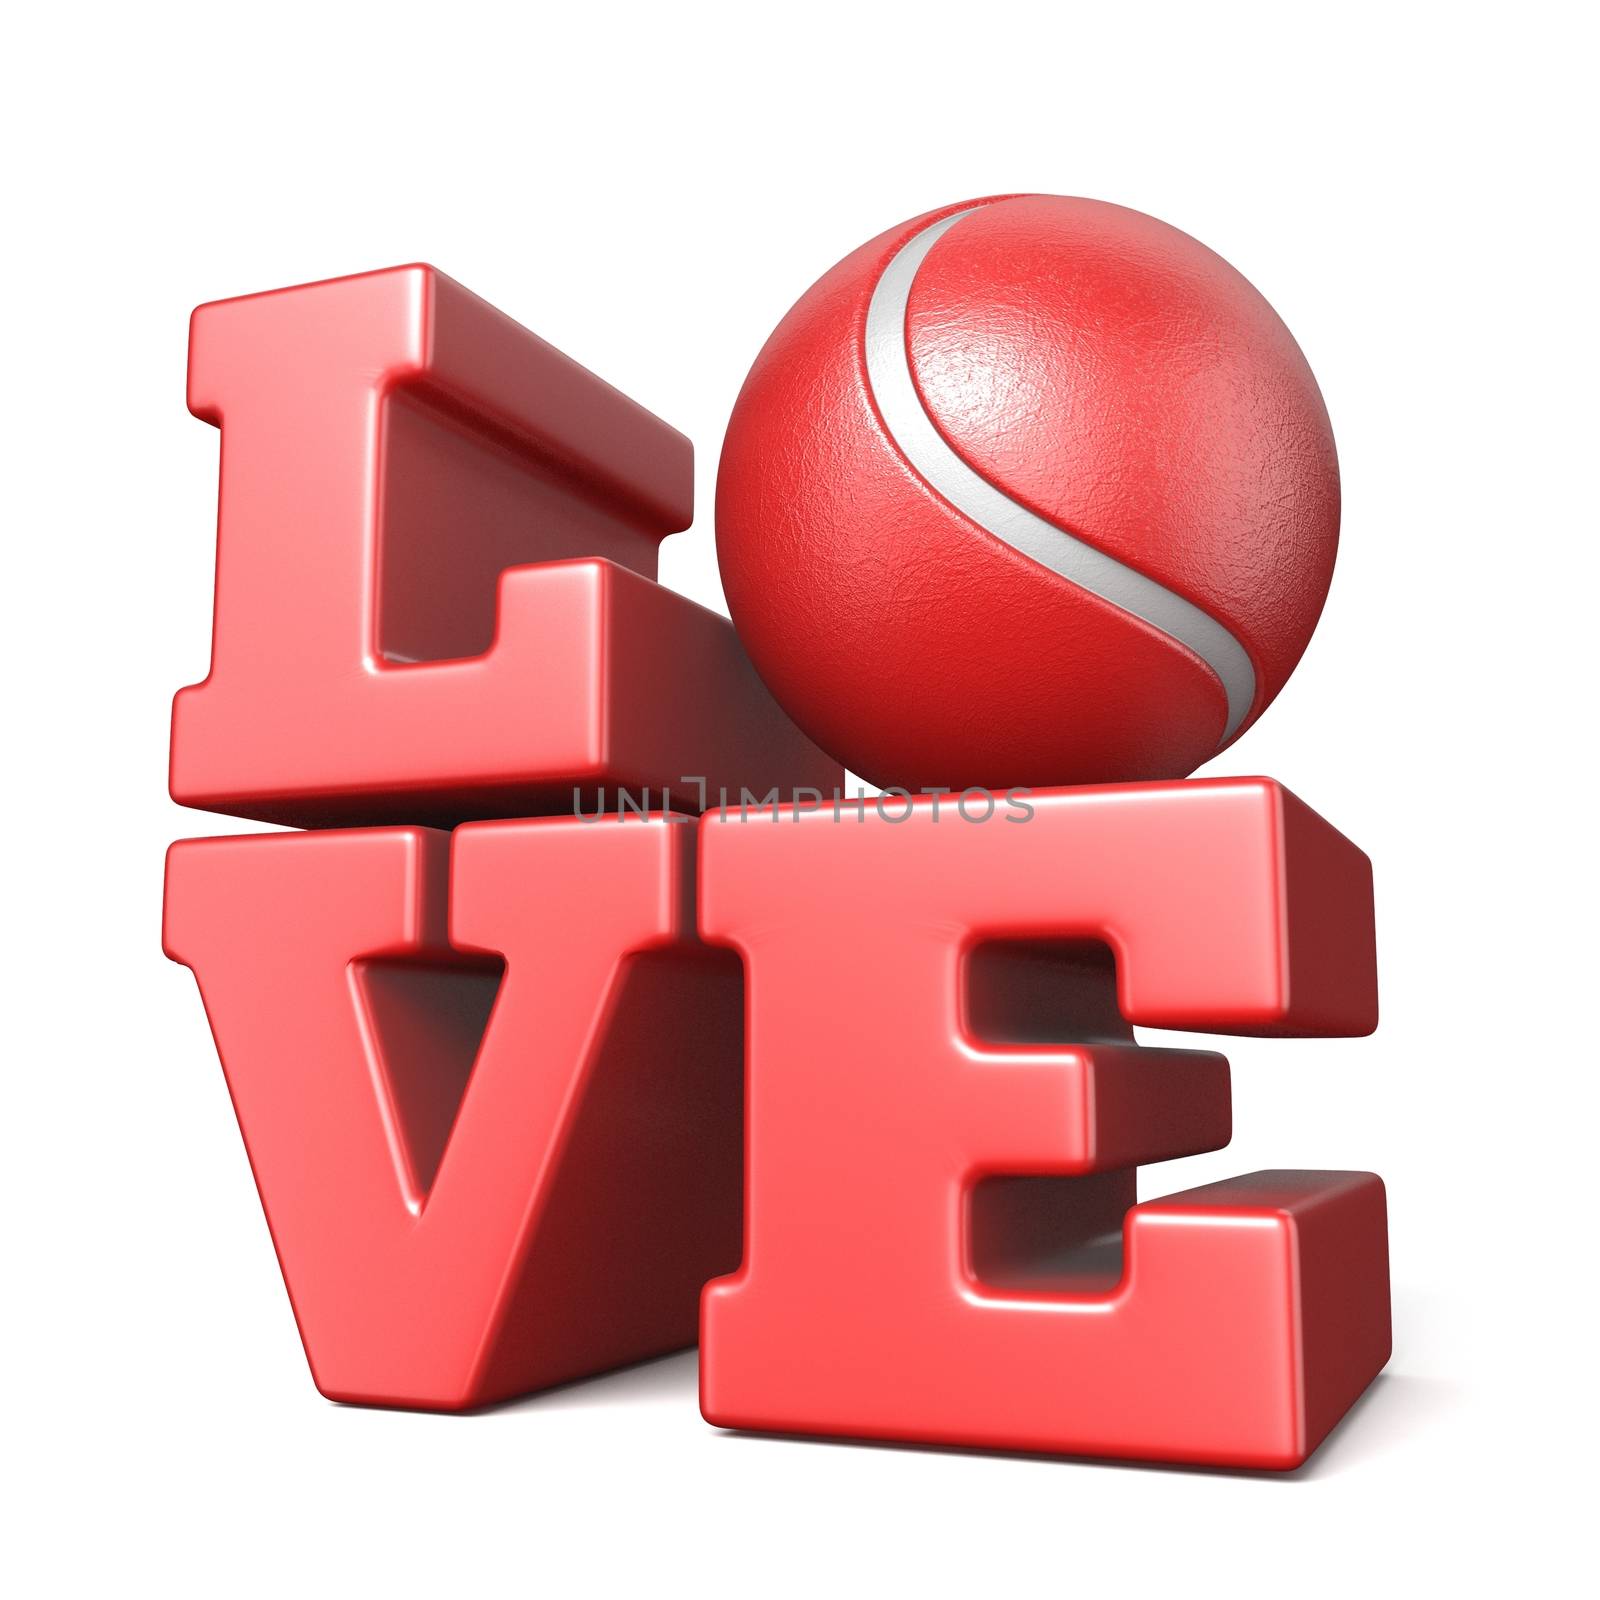 Word LOVE with tennis ball 3D render illustration isolated on white background